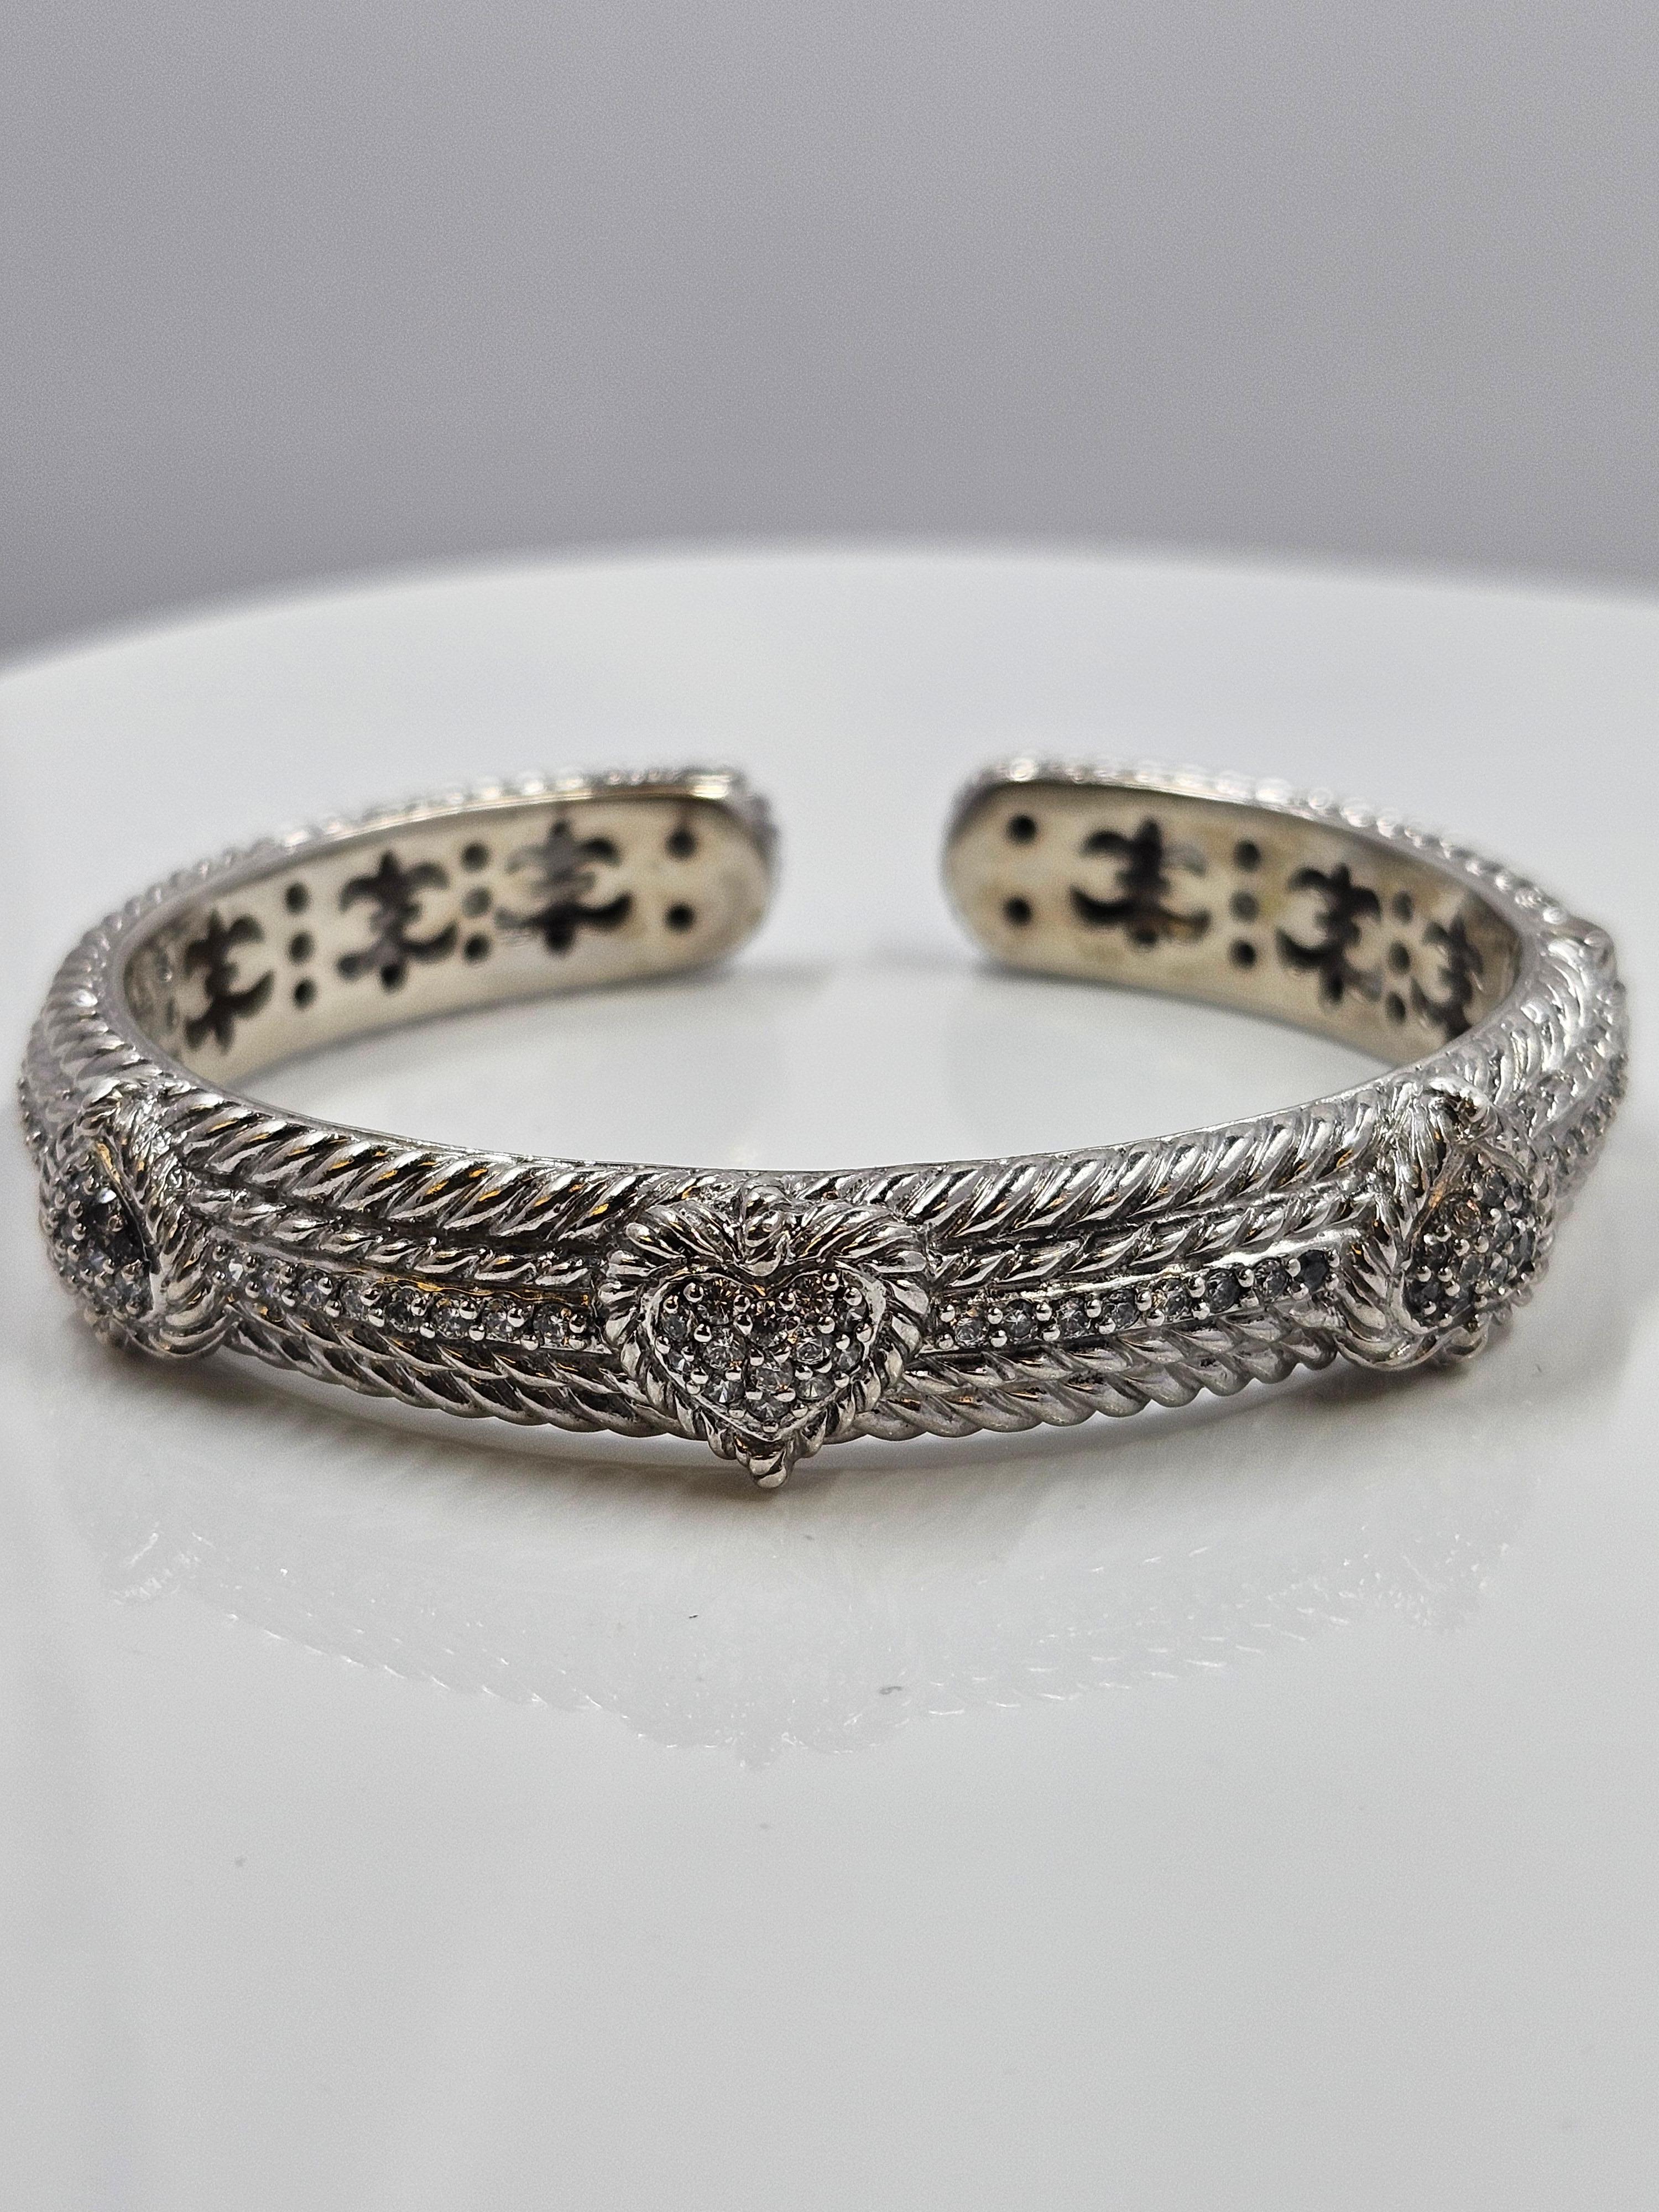 Gorgeous Judith Ripka 925 sterling silver and cz heart hinged cuff bracelet. 62mm diameter and 11mm band thickness.